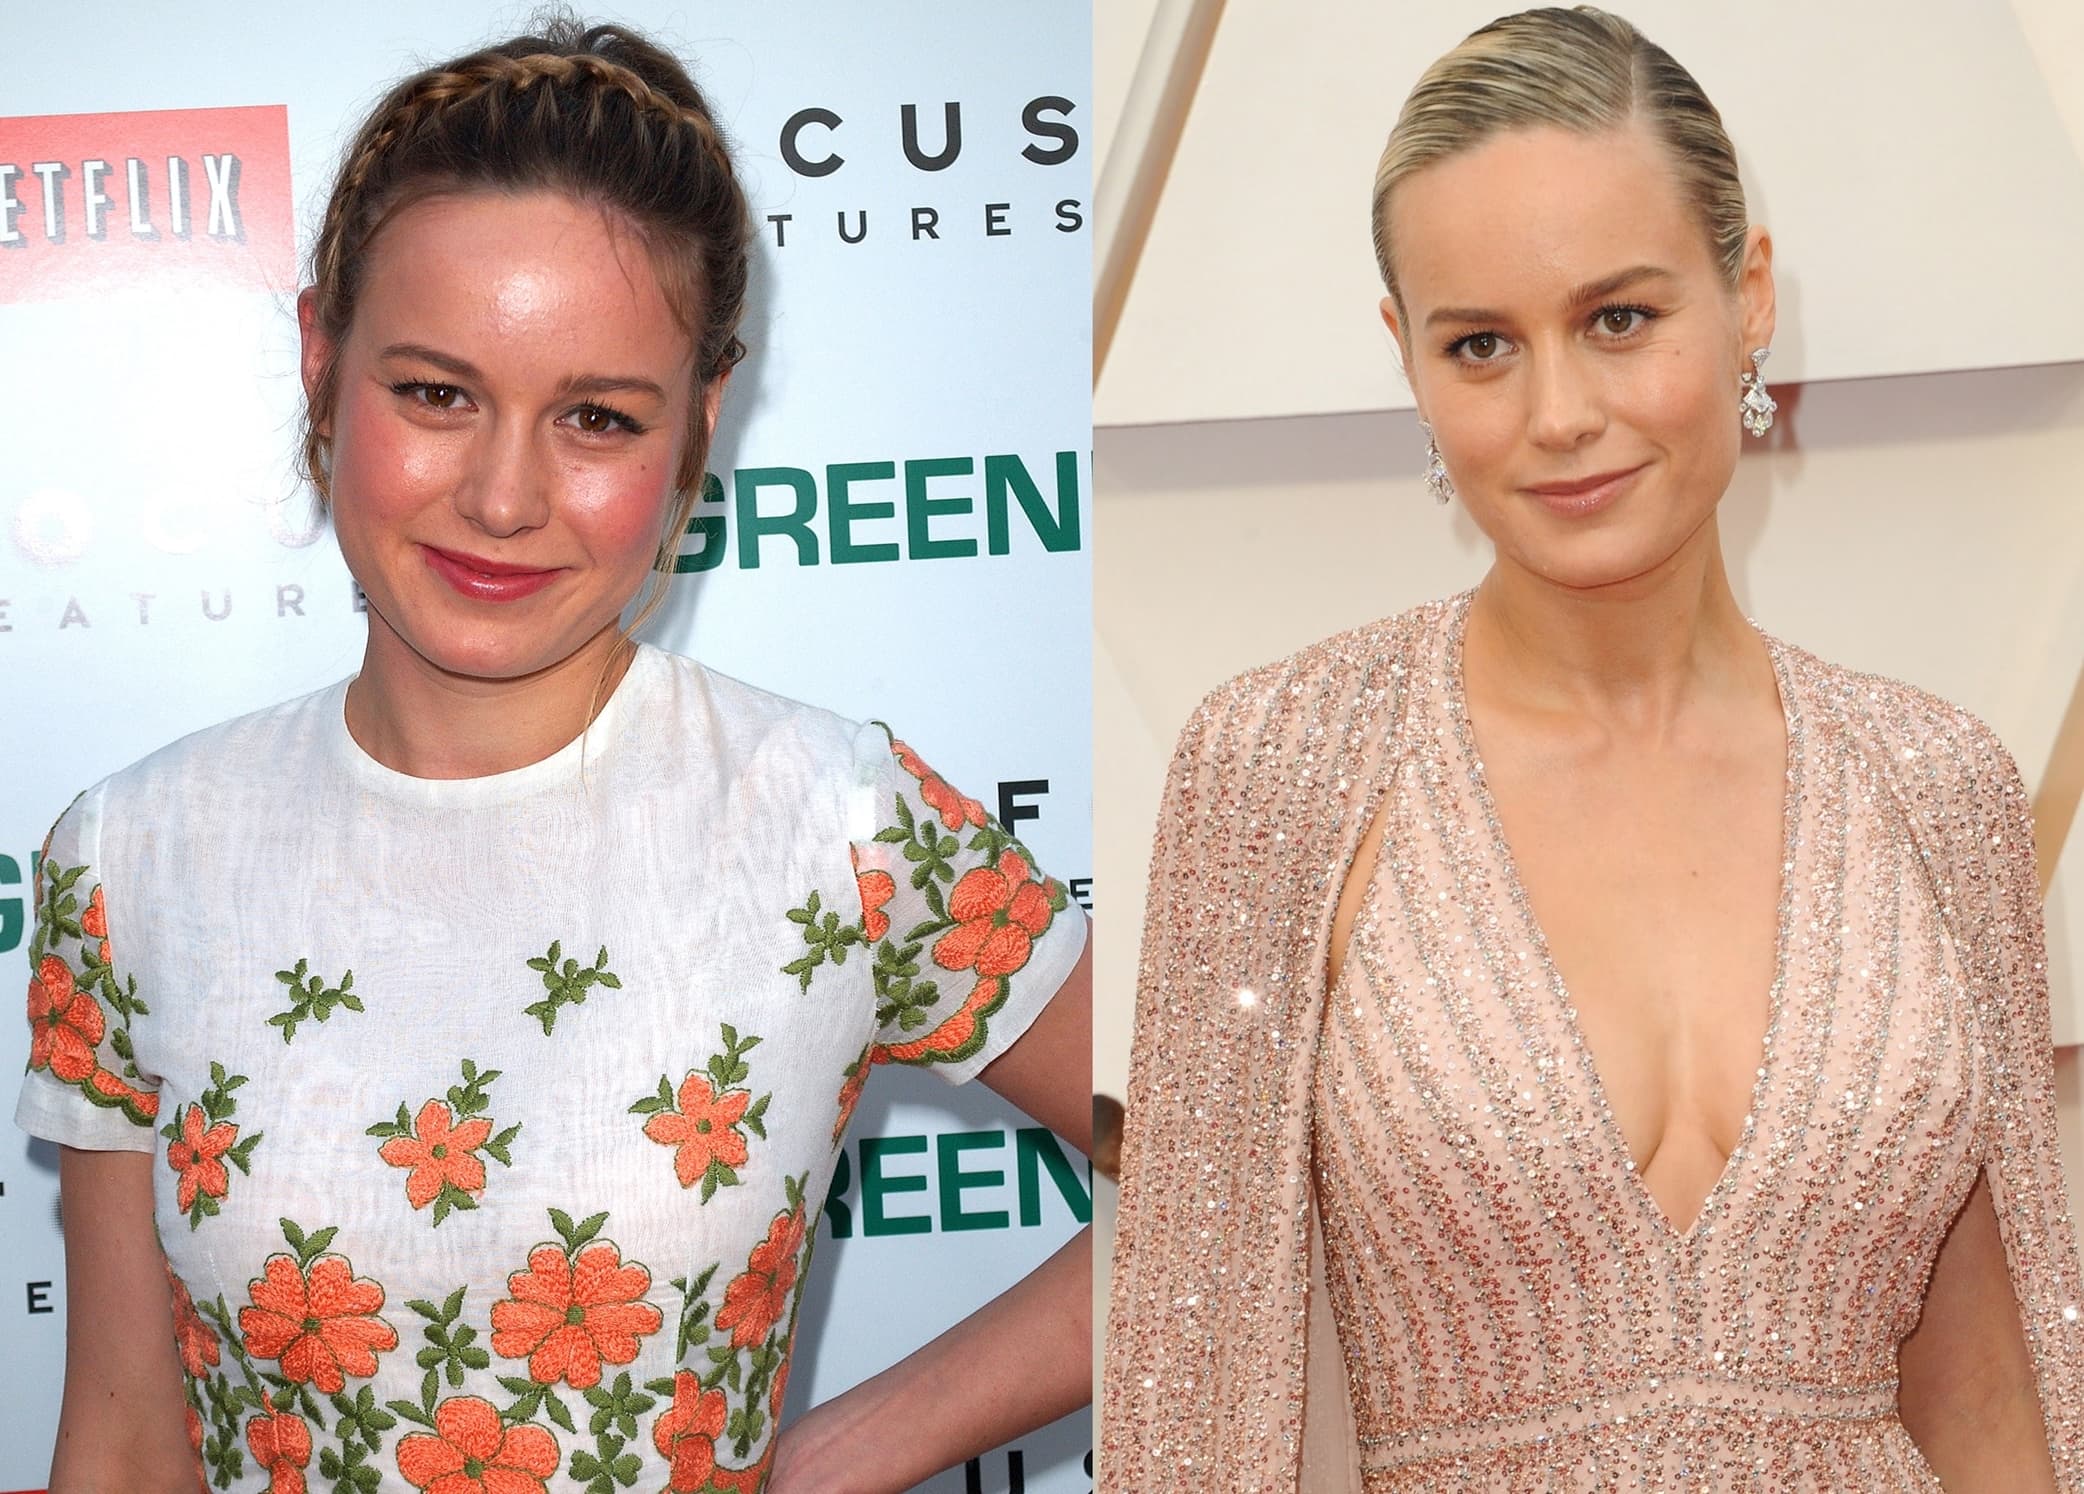 Rumored to have had breast implants, Brie Larson displays her breasts in 2010 (L) and in 2020 (R)